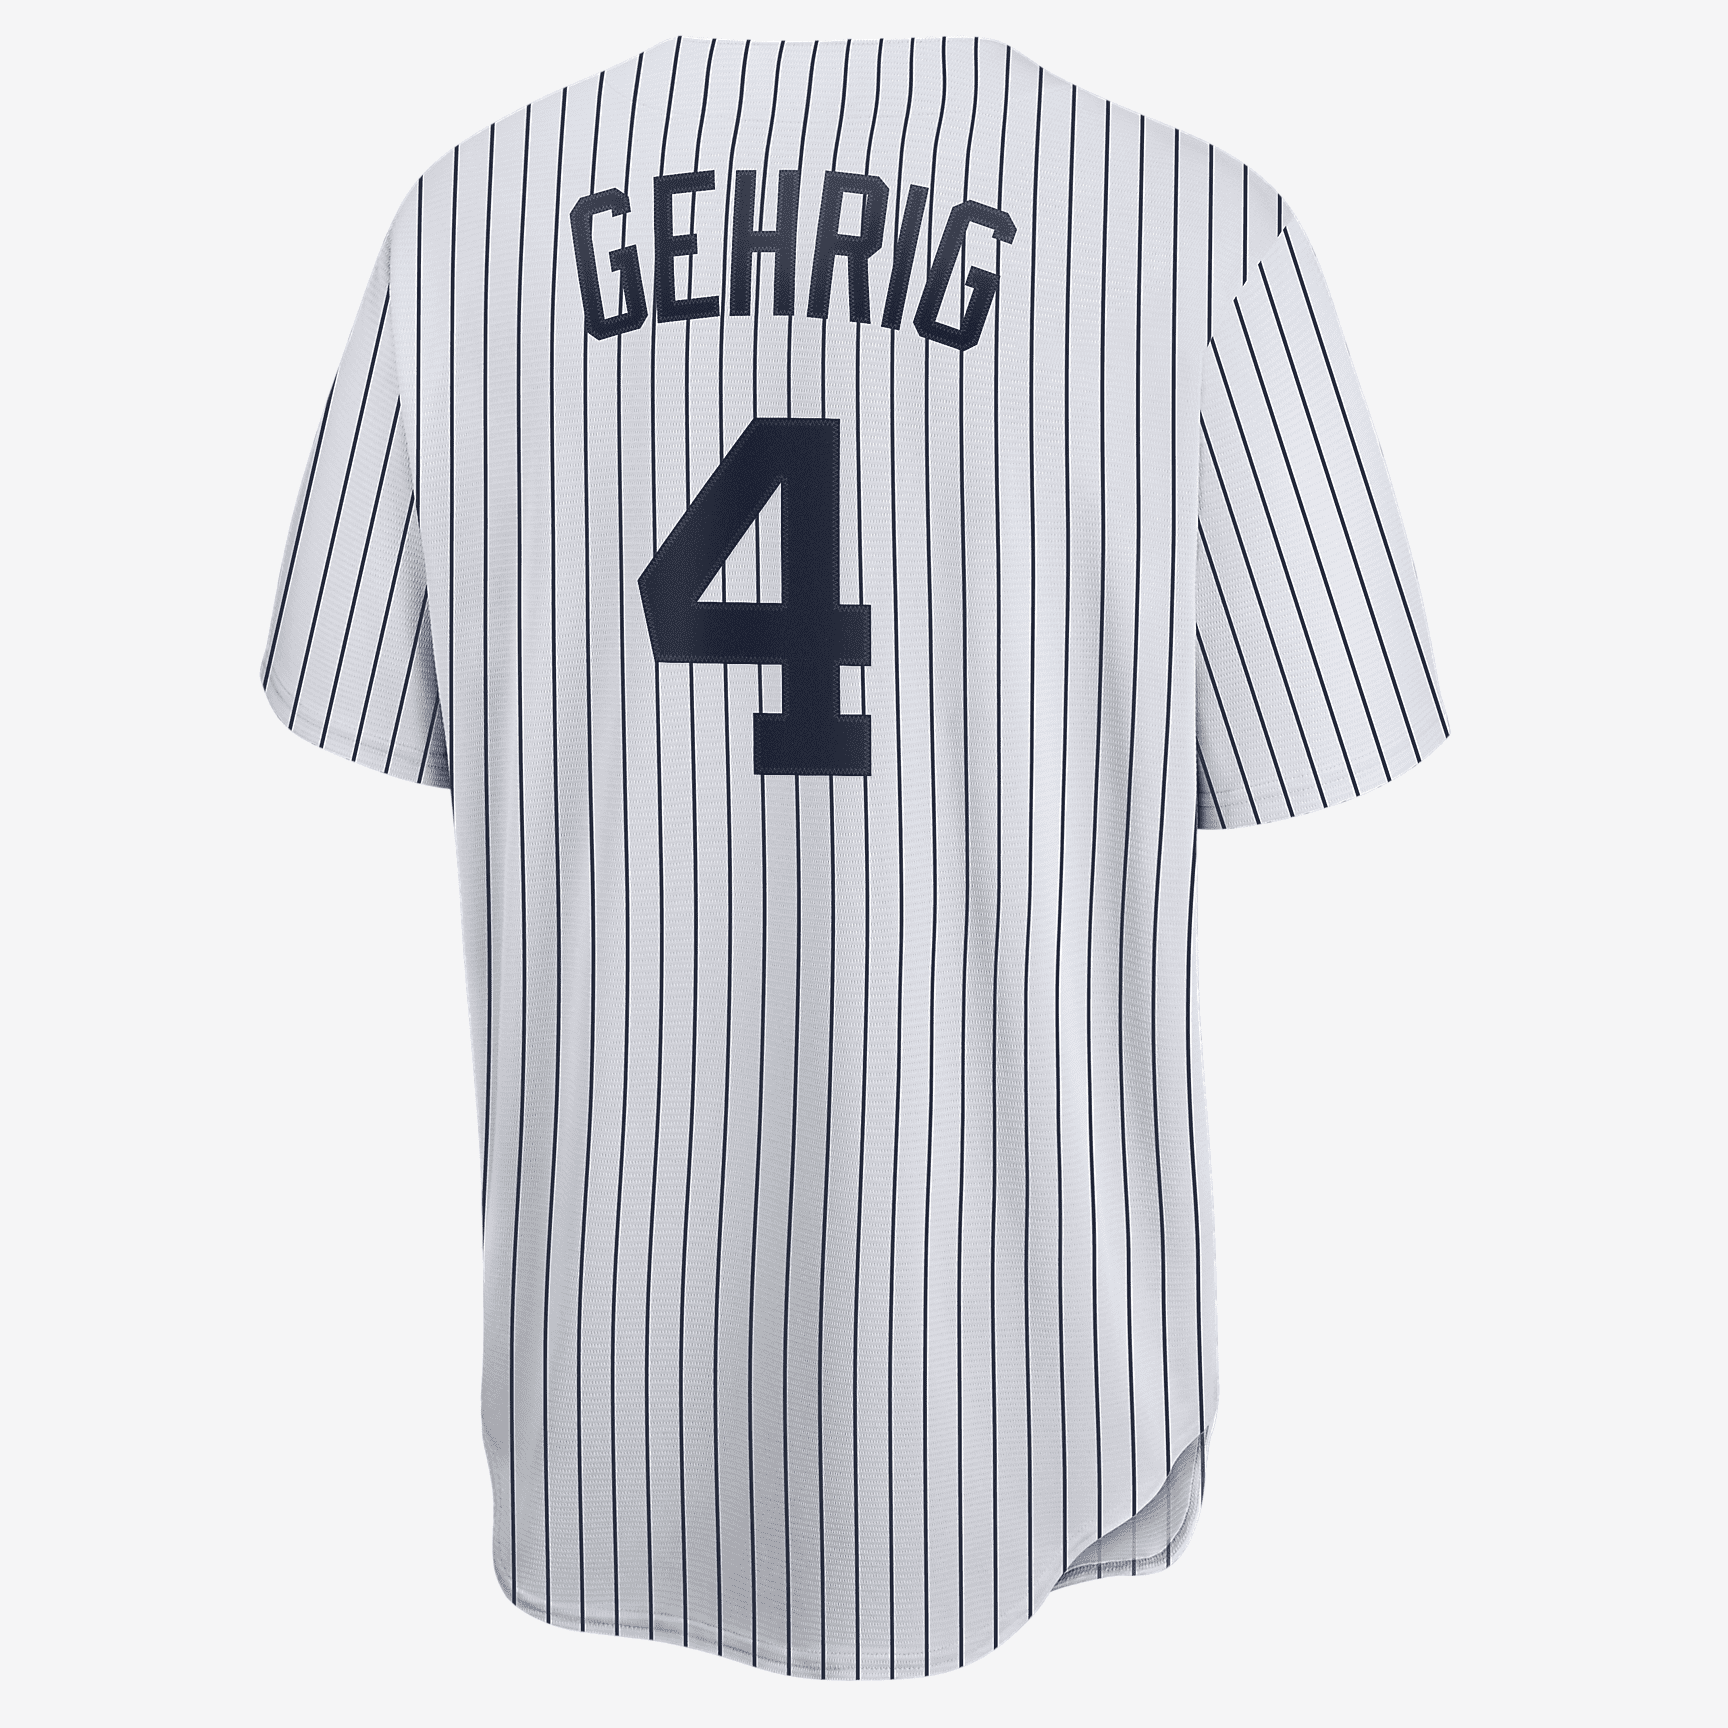 Men's Nike Lou Gehrig White New York Yankees Home Cooperstown